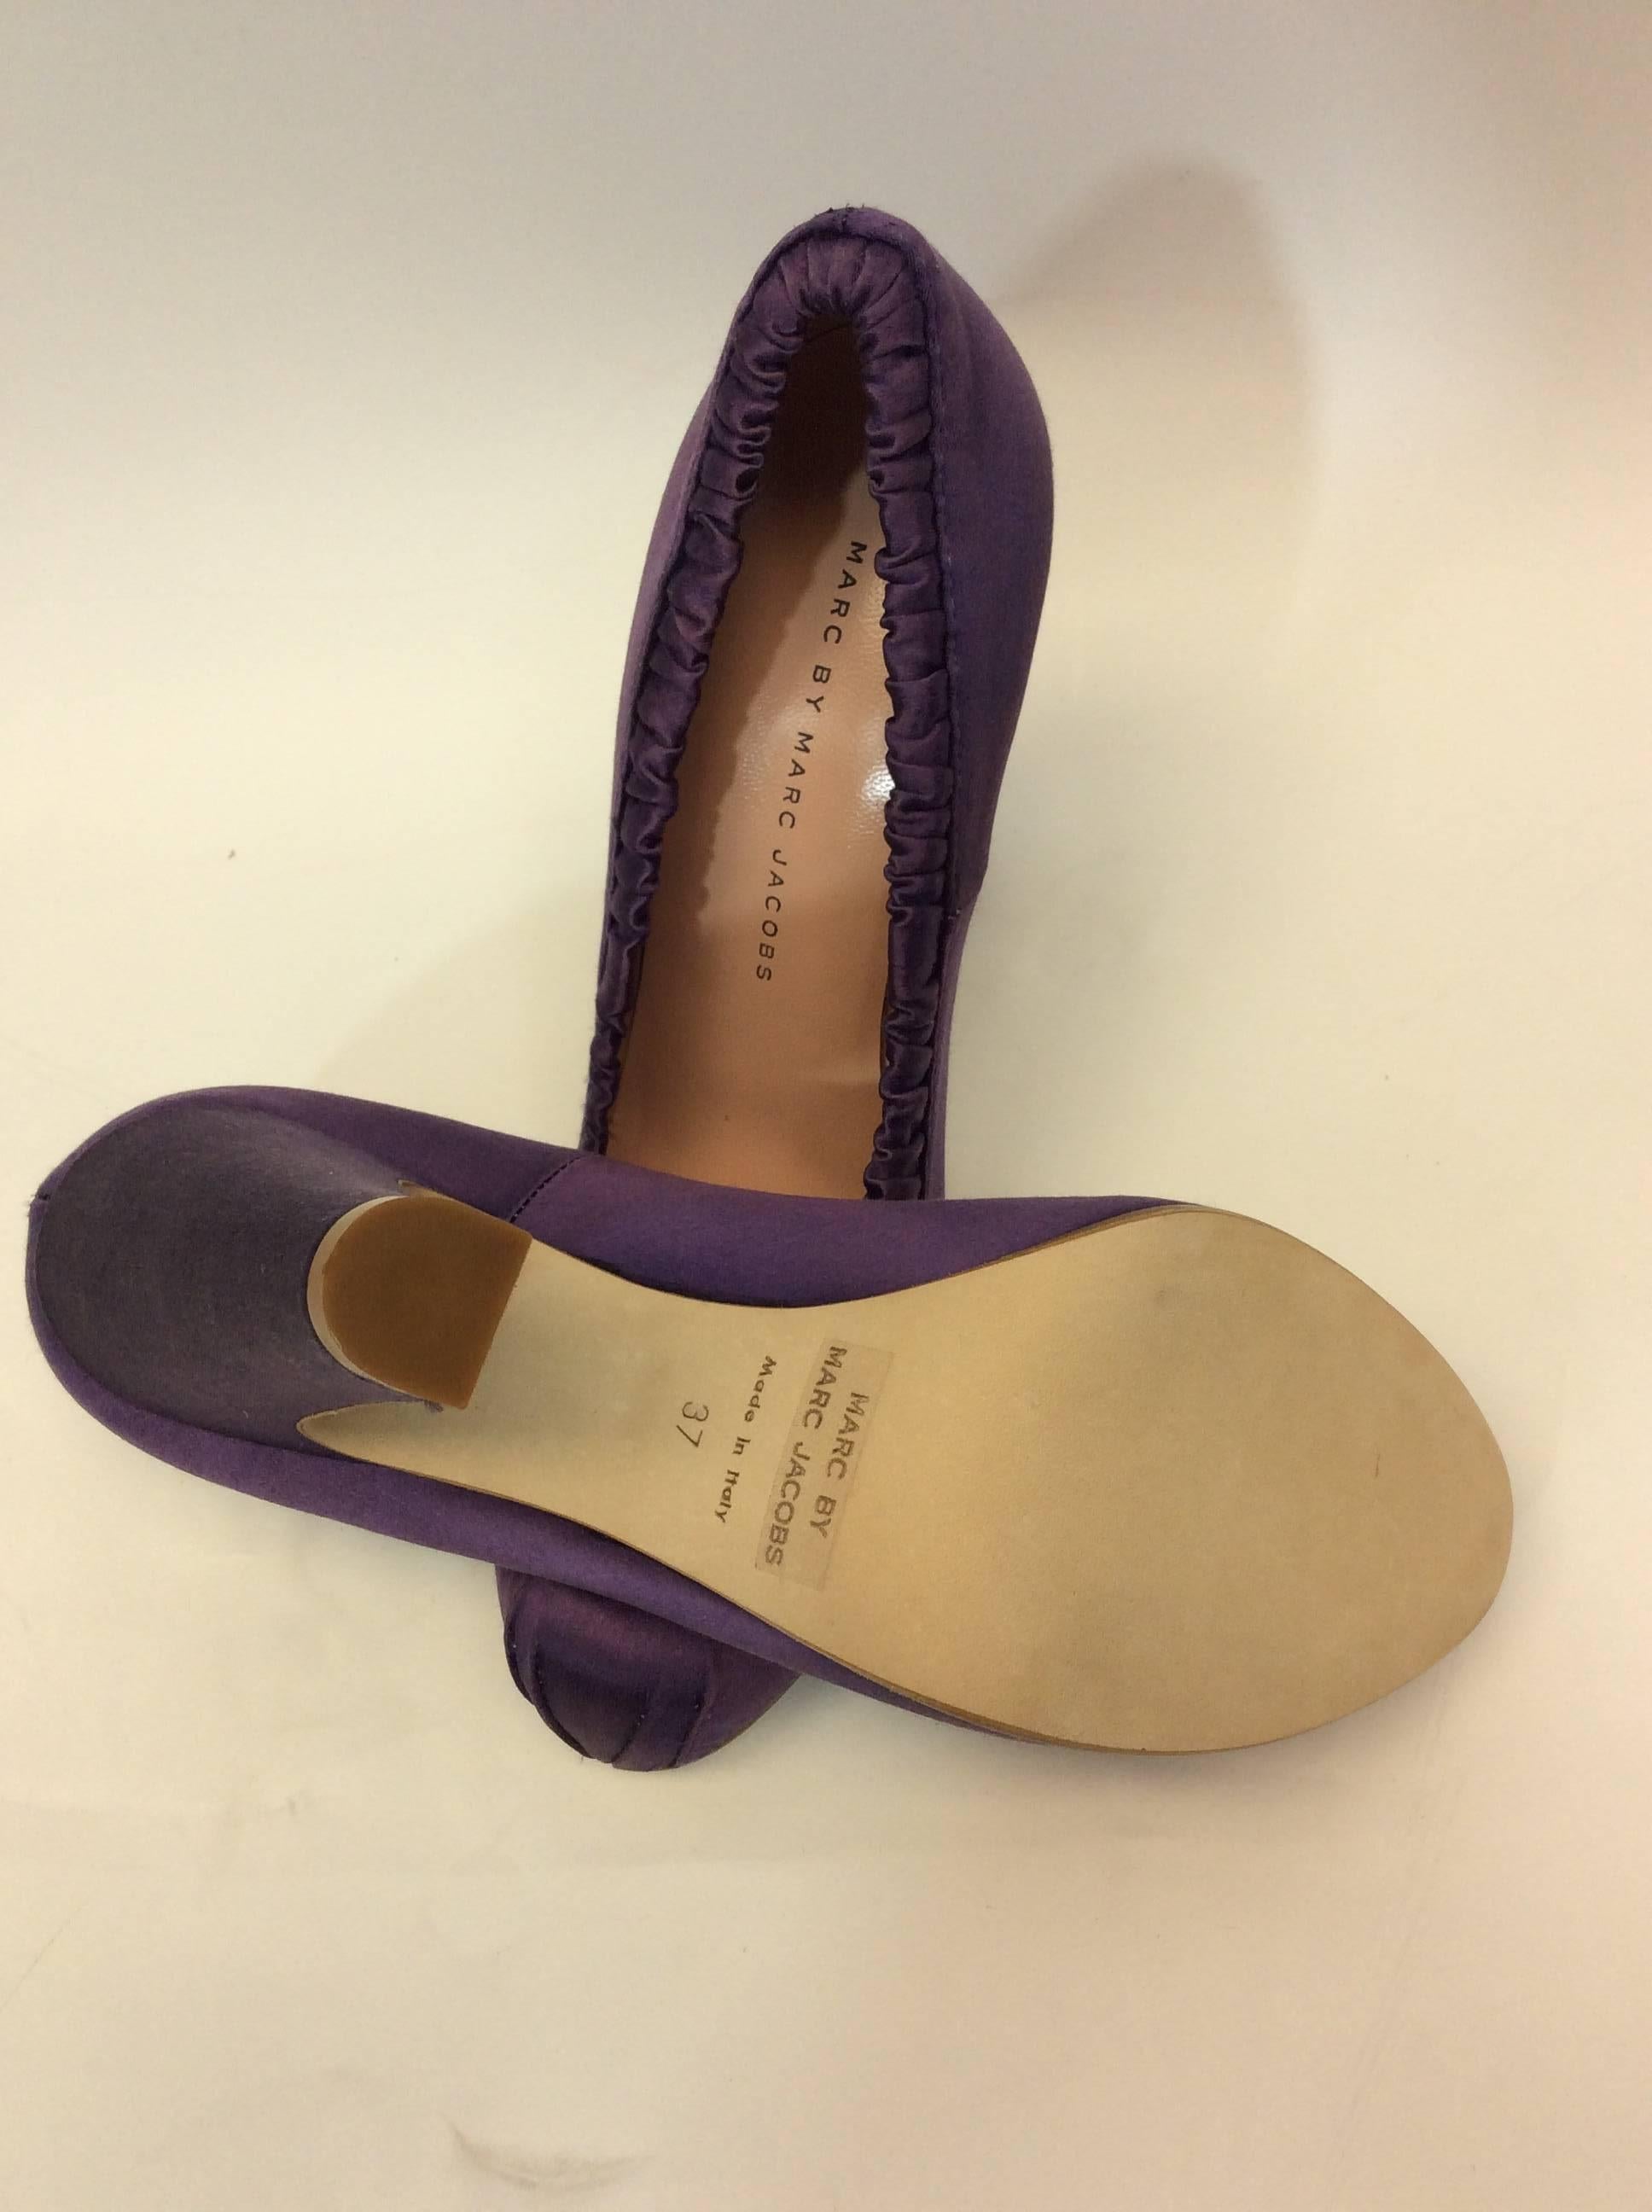 Purple Satin Pumps with Black Bow Detail
4.5 inch heel with 1 inch concealed platform
3.25 inch sole width
Elastic ruched detail around opening of pump
Black bow on toe of pump
Size 37
Satin upper, leather lining and sole
